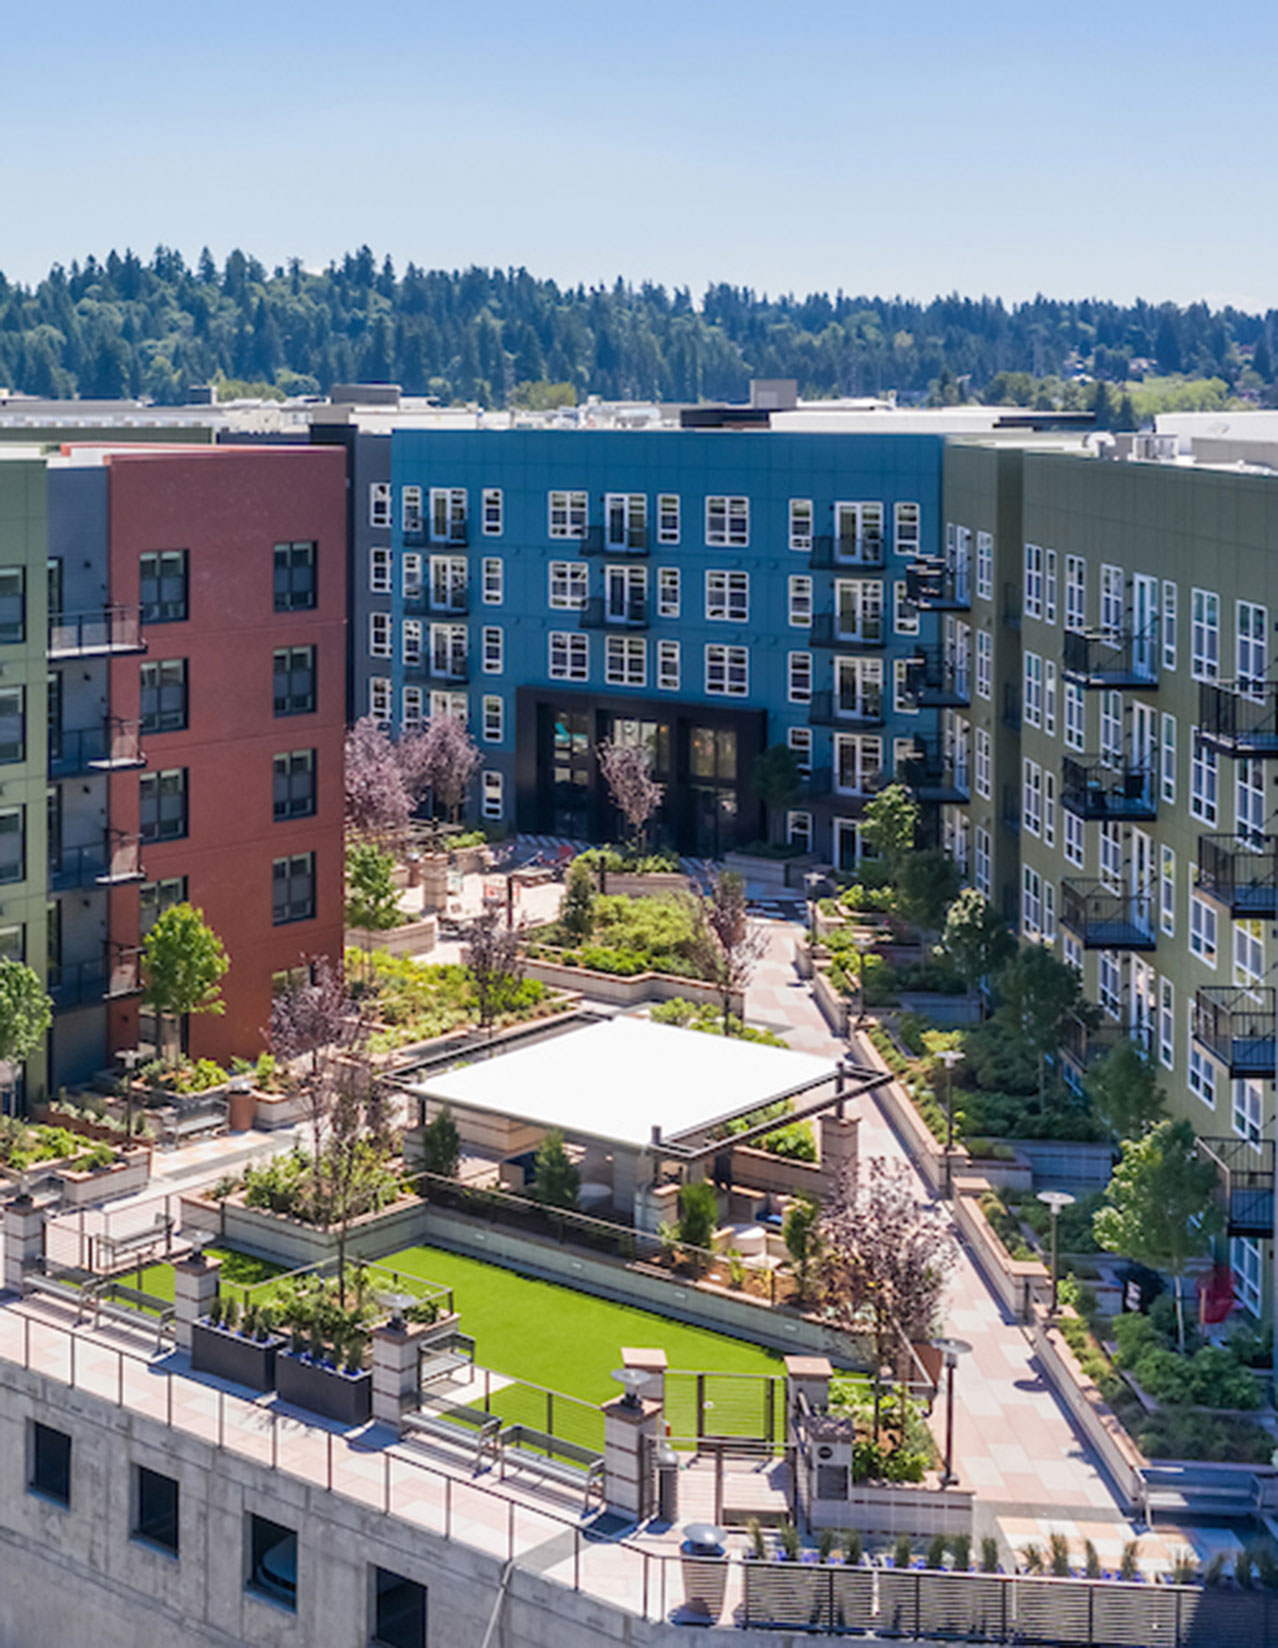 Aerial shot of the landscaping and outdoor amenities of a Fairfield apartment courtyard with tree-lined hills in the background.